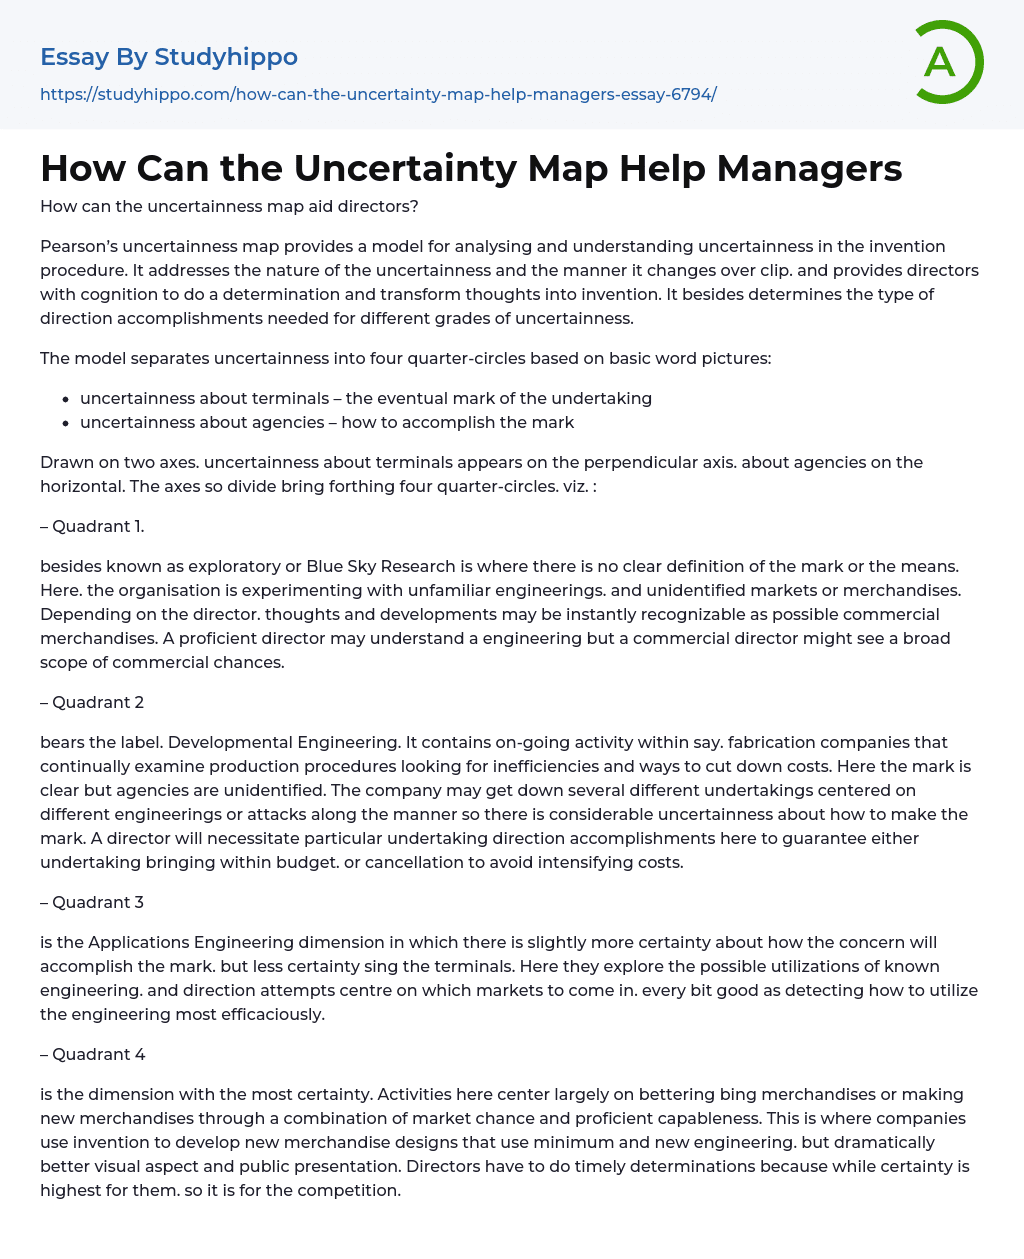 How Can the Uncertainty Map Help Managers